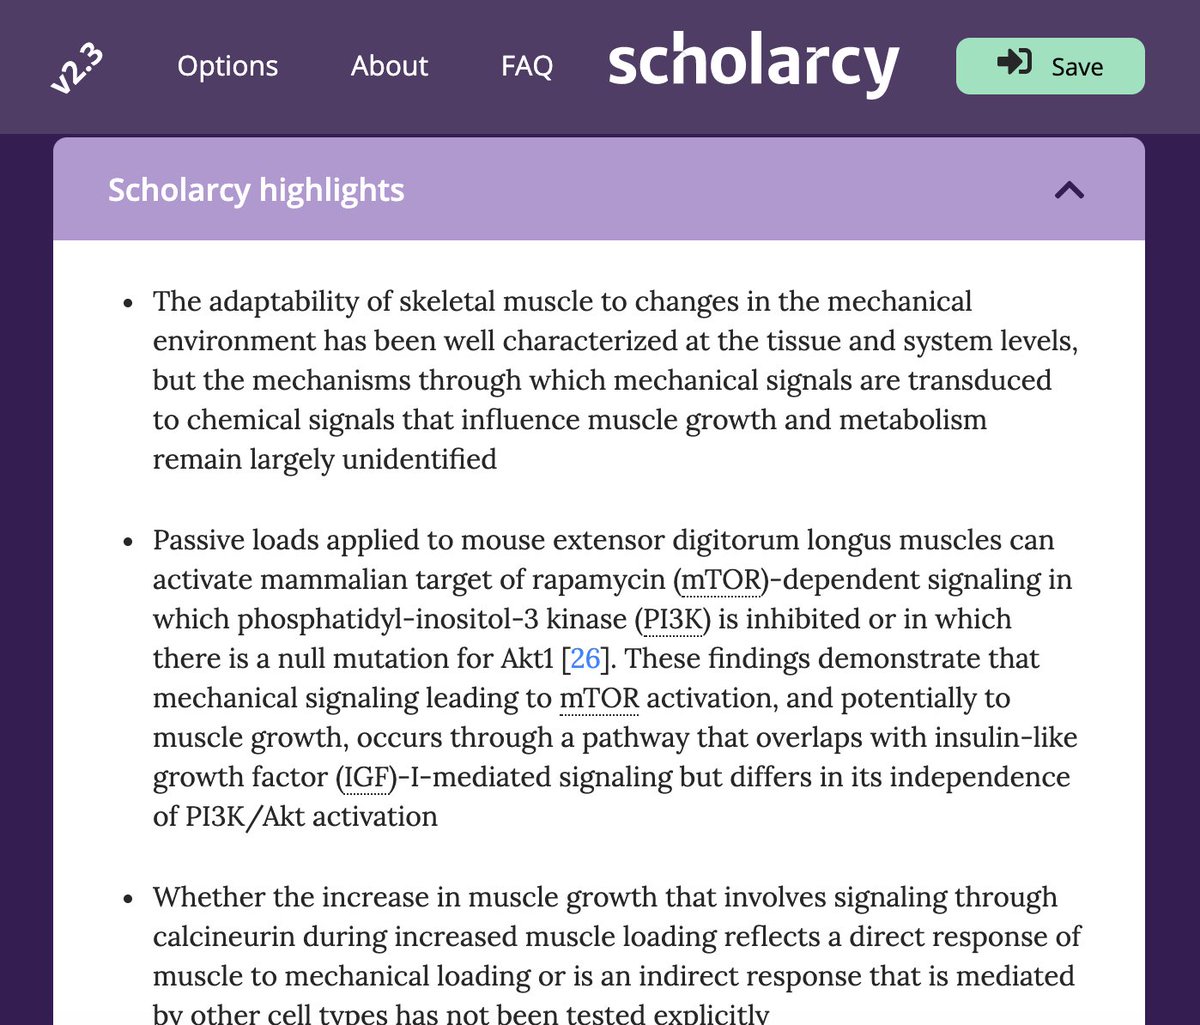 Next we have the Scholarcy plug-in for Chrome. I'll note that there's a paid option that's slightly more functional, but the free version has been a Godsend for me. Pin it to your browser, open a paper, hit the button and it outputs a summary of the most important points.